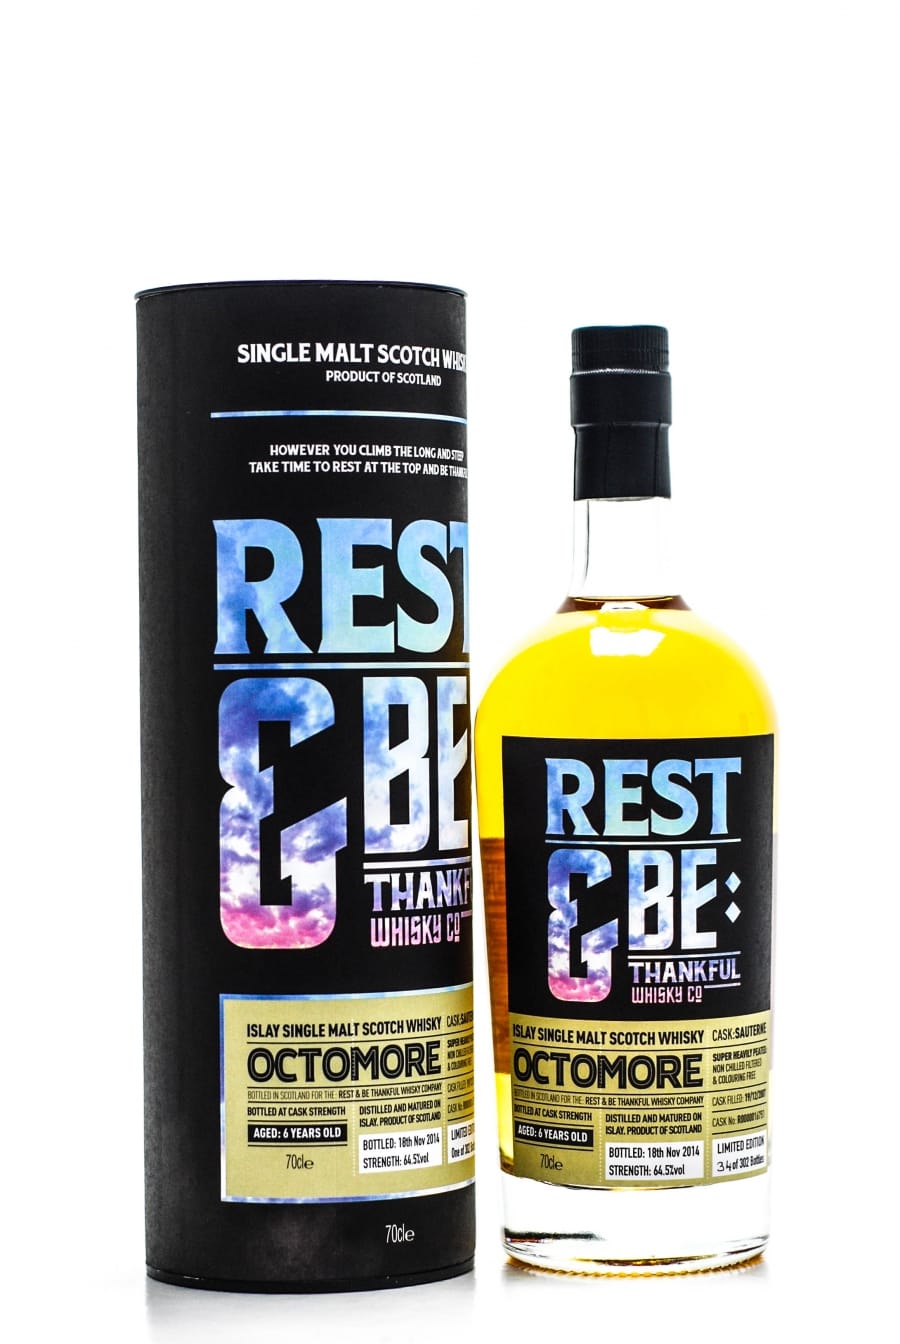 Bruichladdich - Octomore 6 Years Old Rest & be Thankful Whisky Company Cask:R0000016751 64.5% 2007 In Original Container